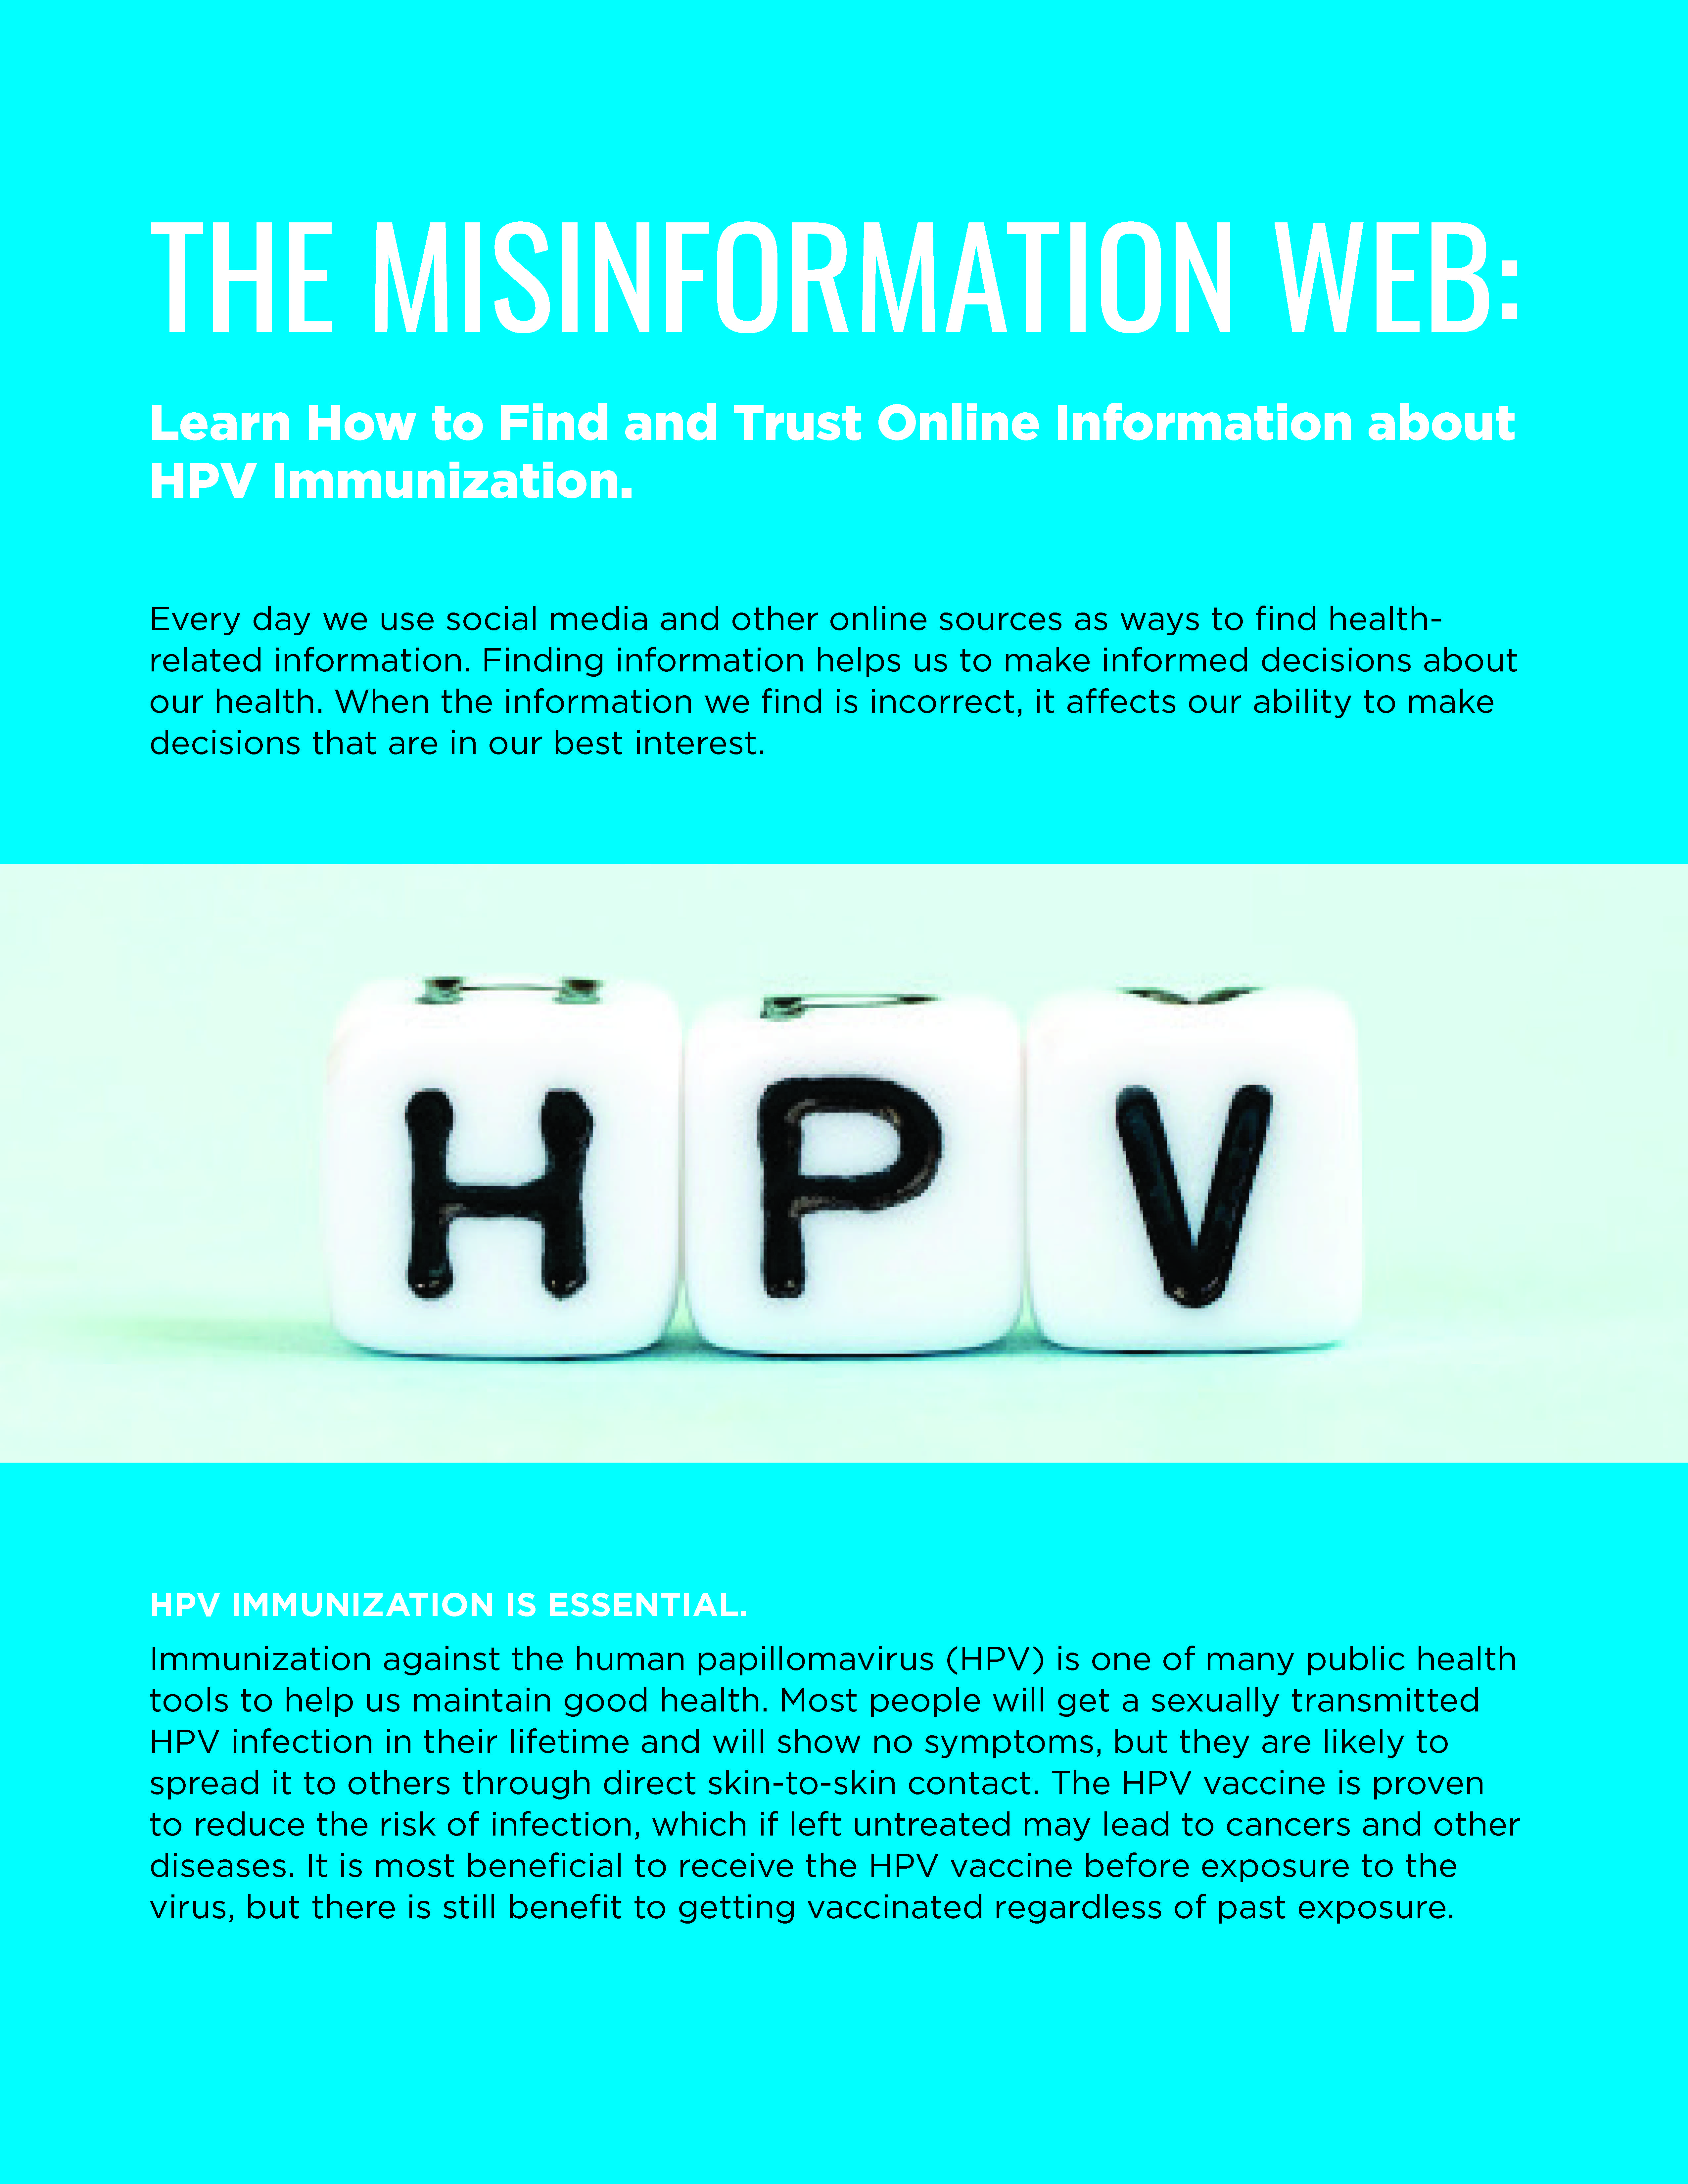 The Misinformation Web: Learn How to Find and Trust Online Information about HPV Immunization - fact sheet